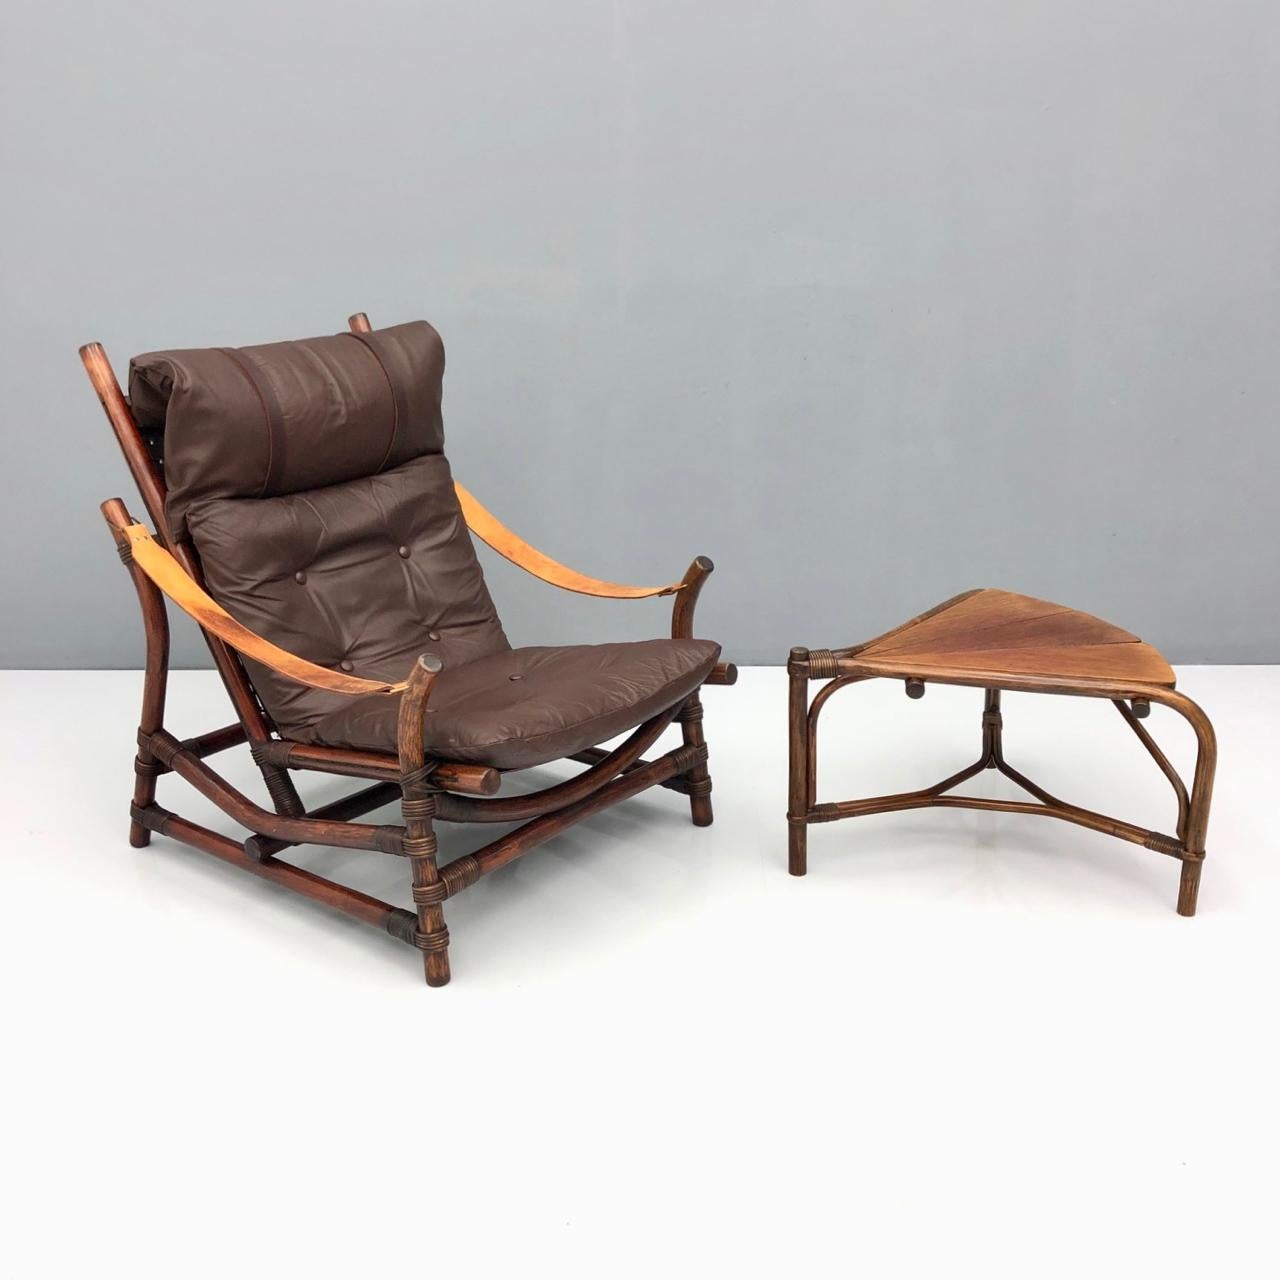 Leather Bamboo Lounge Chair with a Table, 1960s For Sale 11